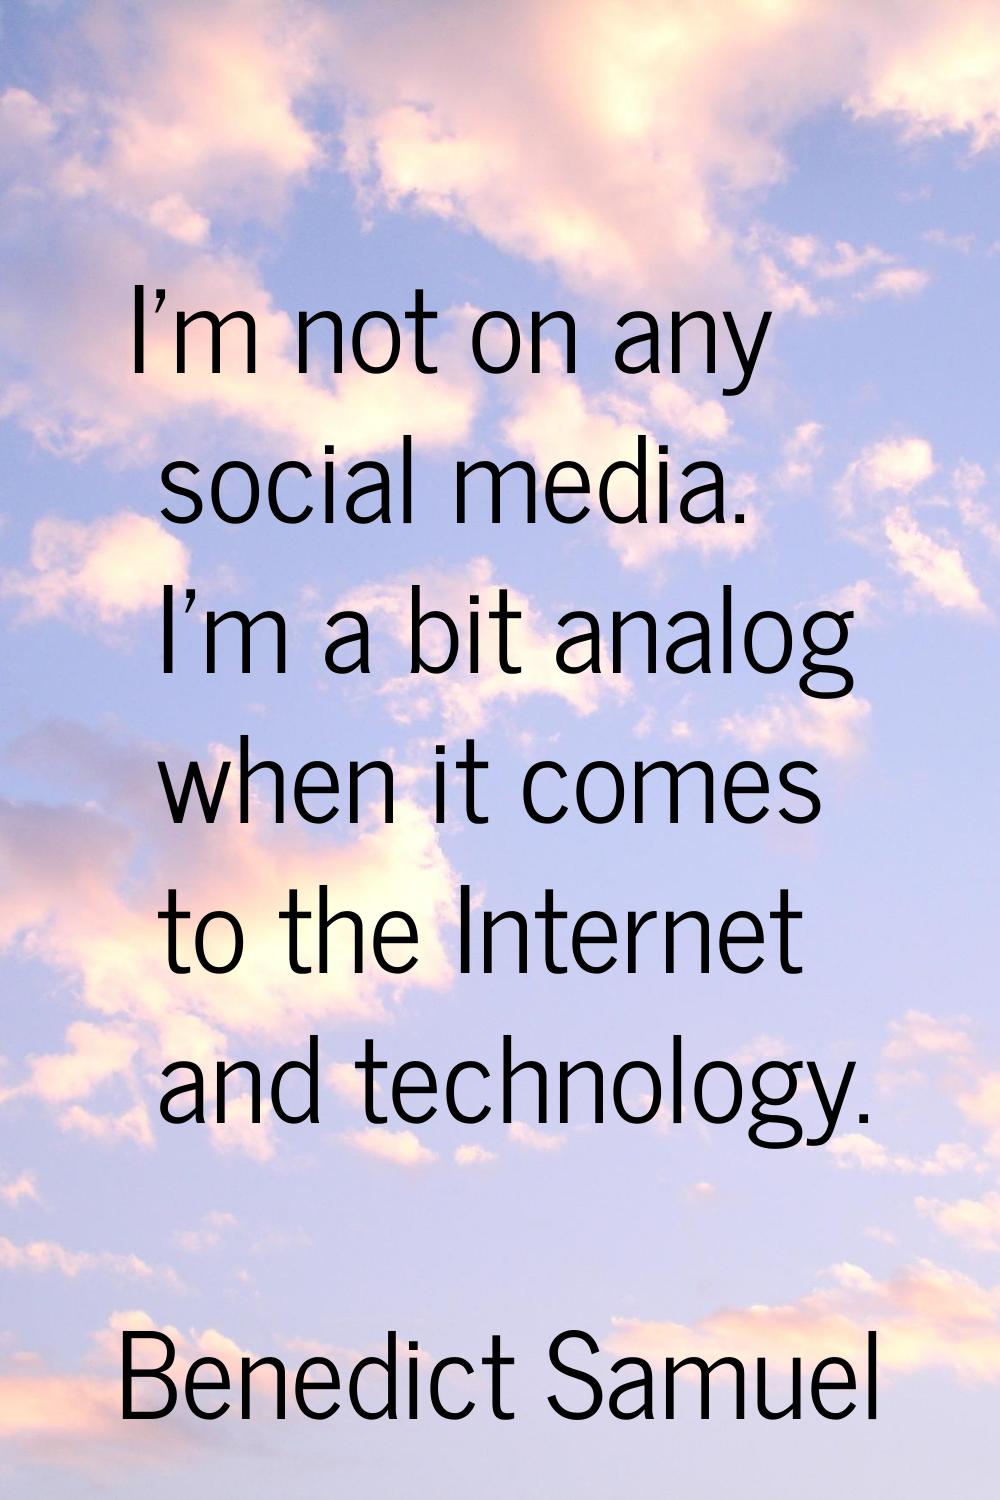 I'm not on any social media. I'm a bit analog when it comes to the Internet and technology.